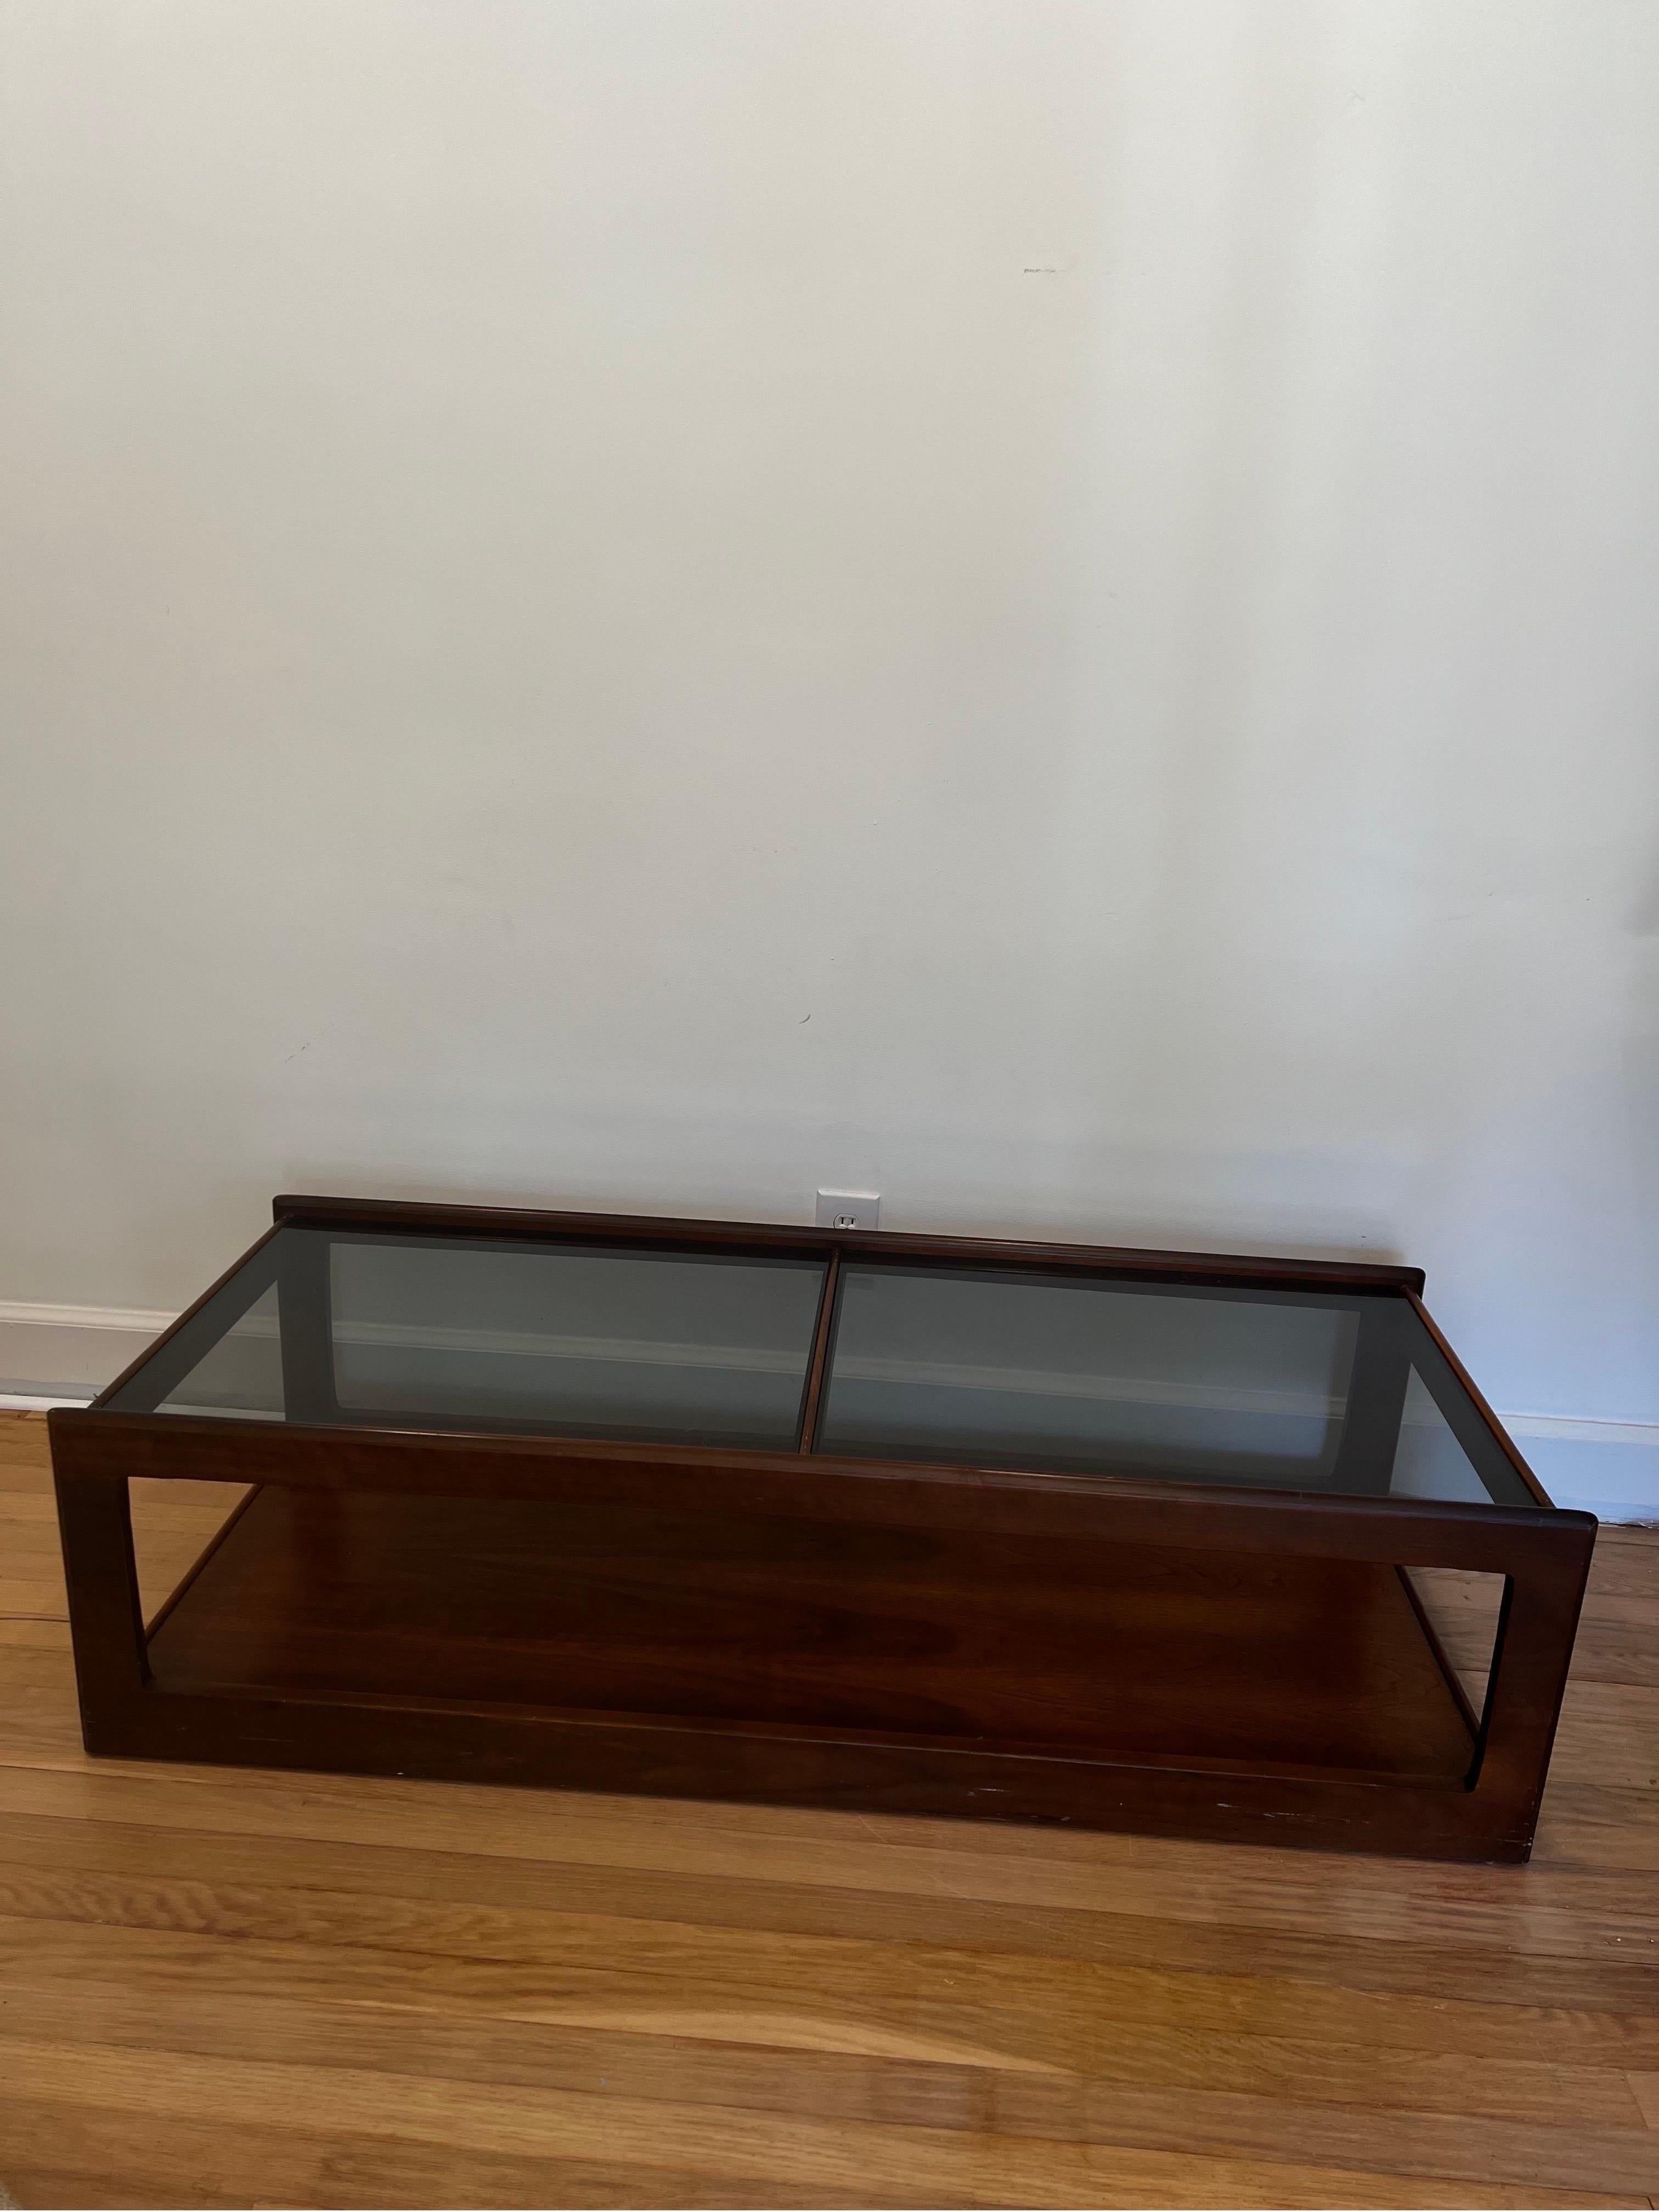 Sleek walnut with smoked glass mid century modern coffee table in the style of John Keal for Brown Saltman.  

*We have a pair of matching end tables.  See our other listing if interested in complete set. 
